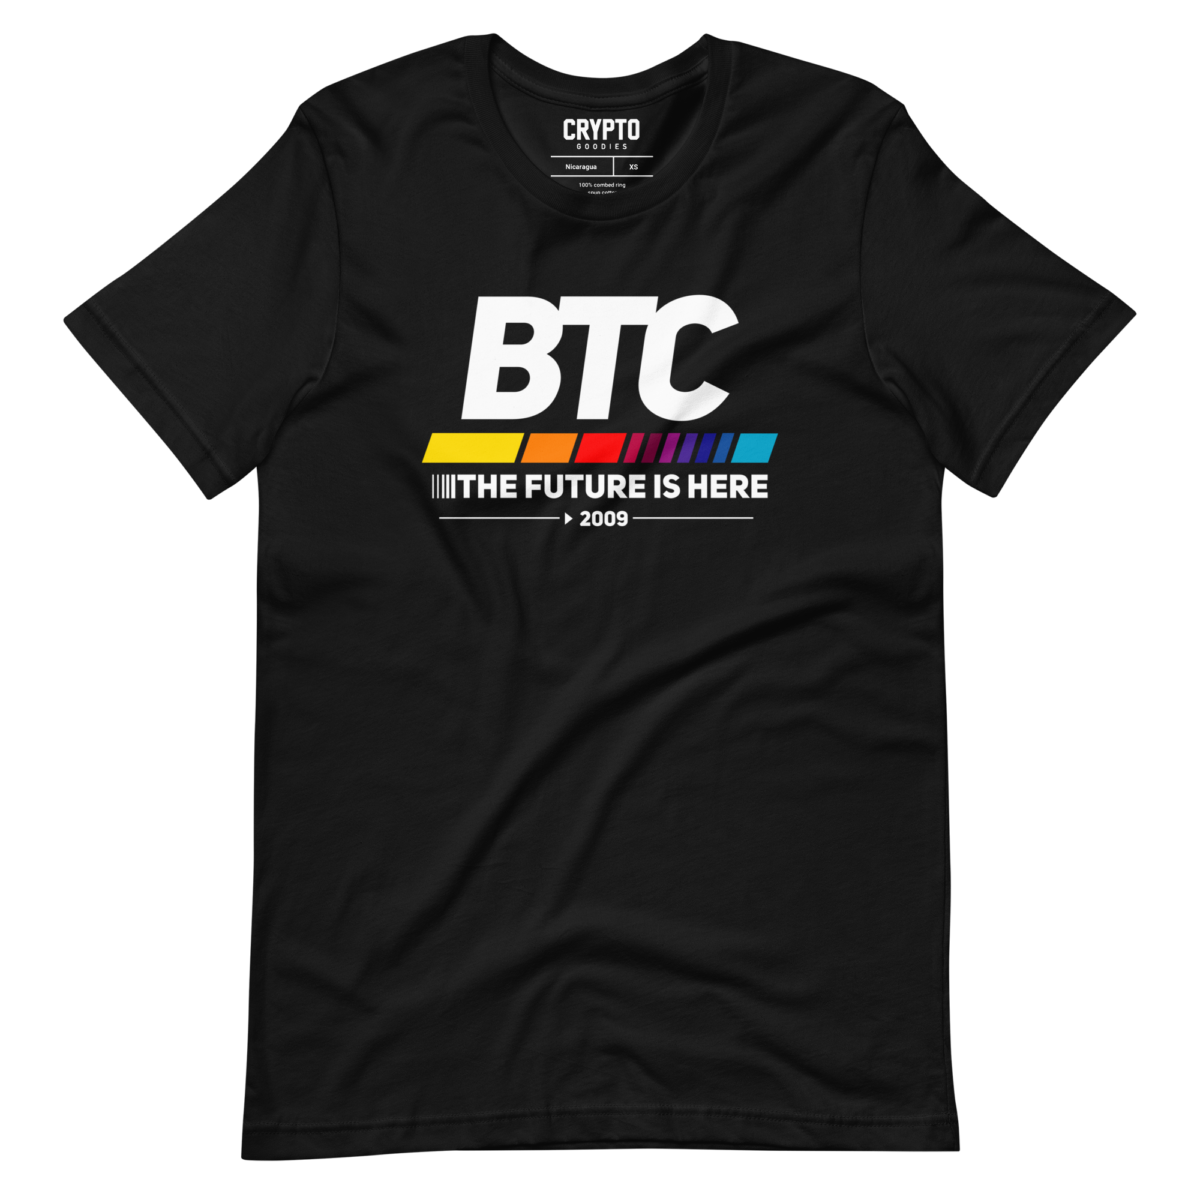 unisex staple t shirt black front 633d7ac5a44a1 - Bitcoin: The Future Is Here T-Shirt